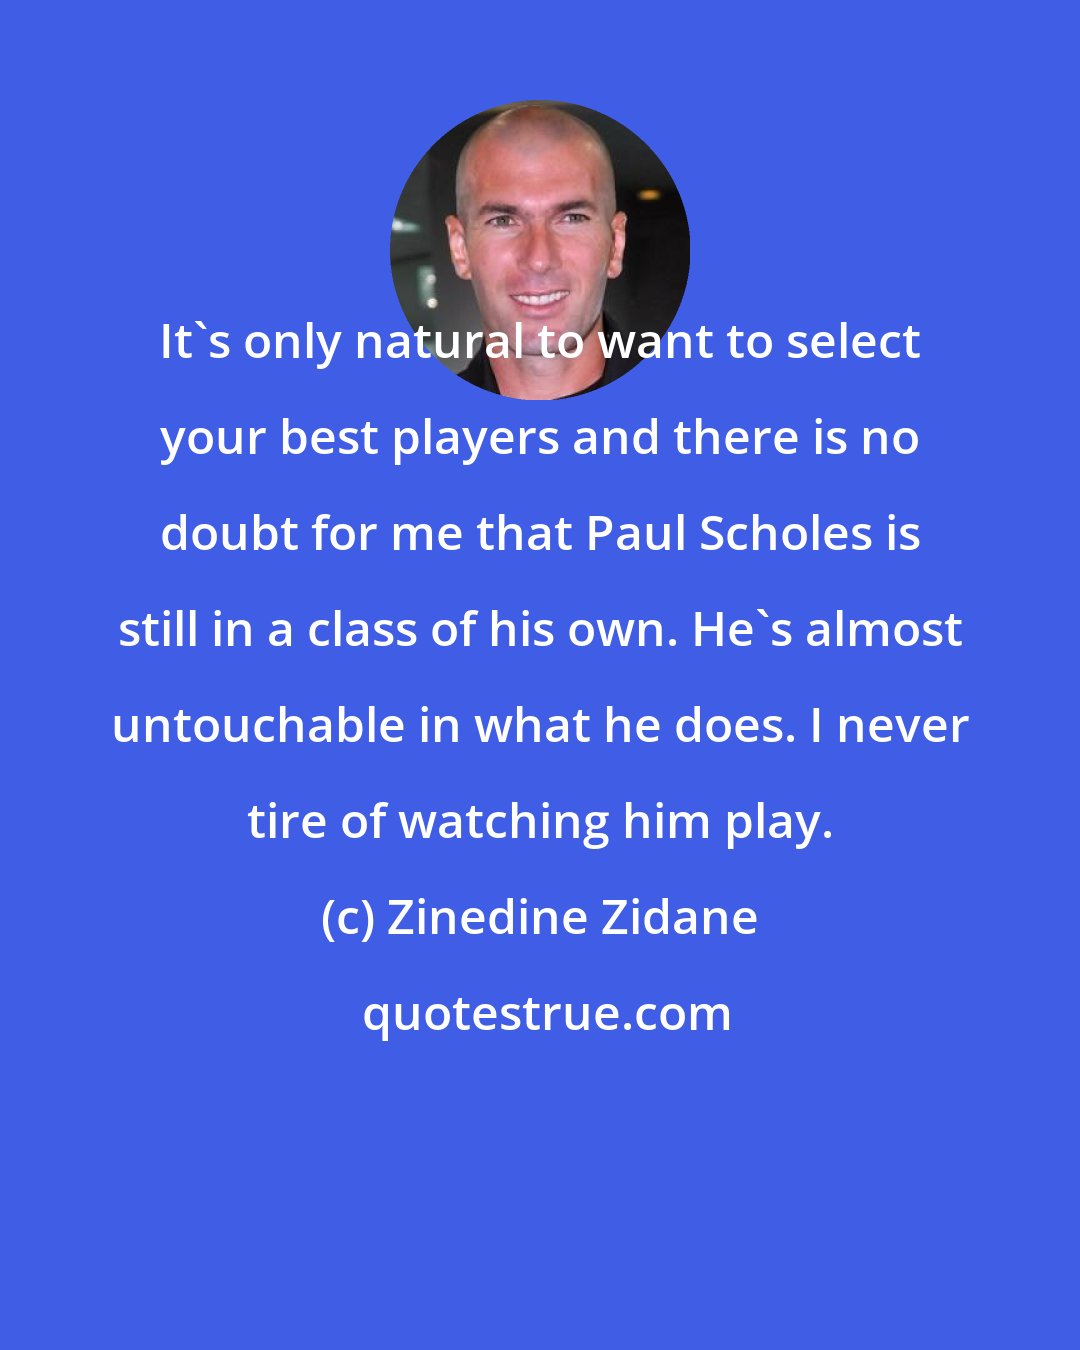 Zinedine Zidane: It's only natural to want to select your best players and there is no doubt for me that Paul Scholes is still in a class of his own. He's almost untouchable in what he does. I never tire of watching him play.